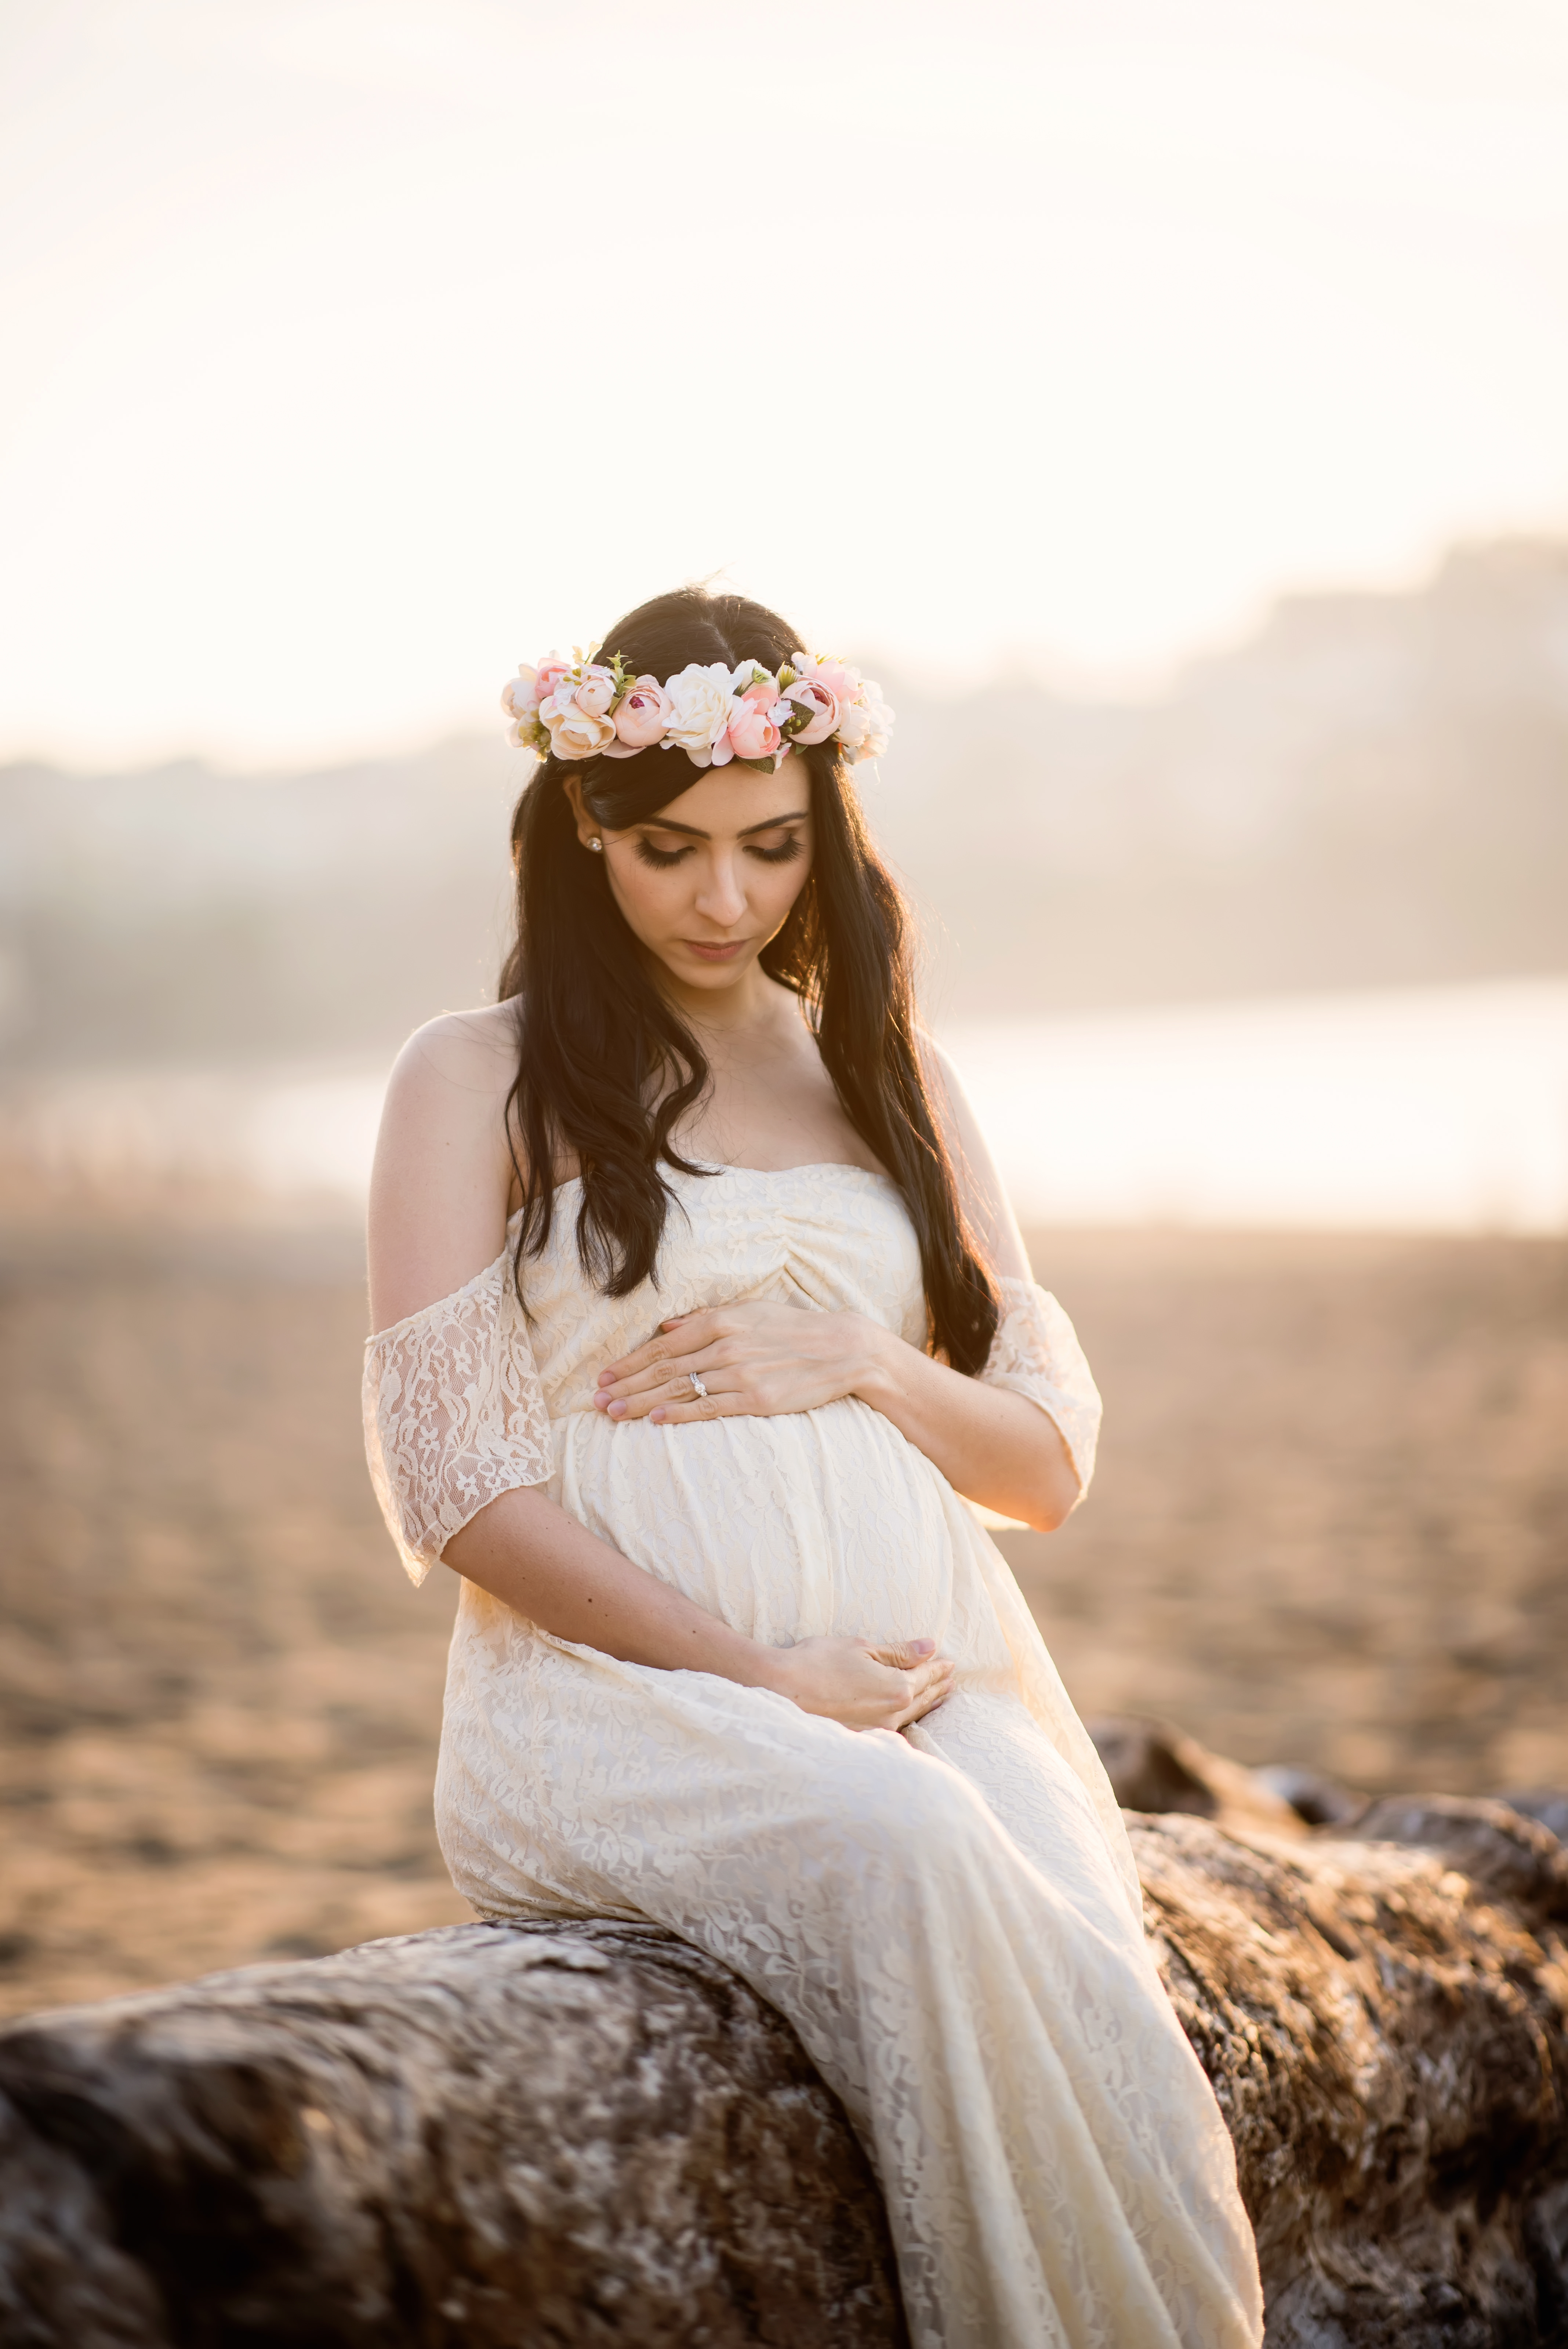 Is A White Dress Good For Maternity Portraits? - Steven Cotton